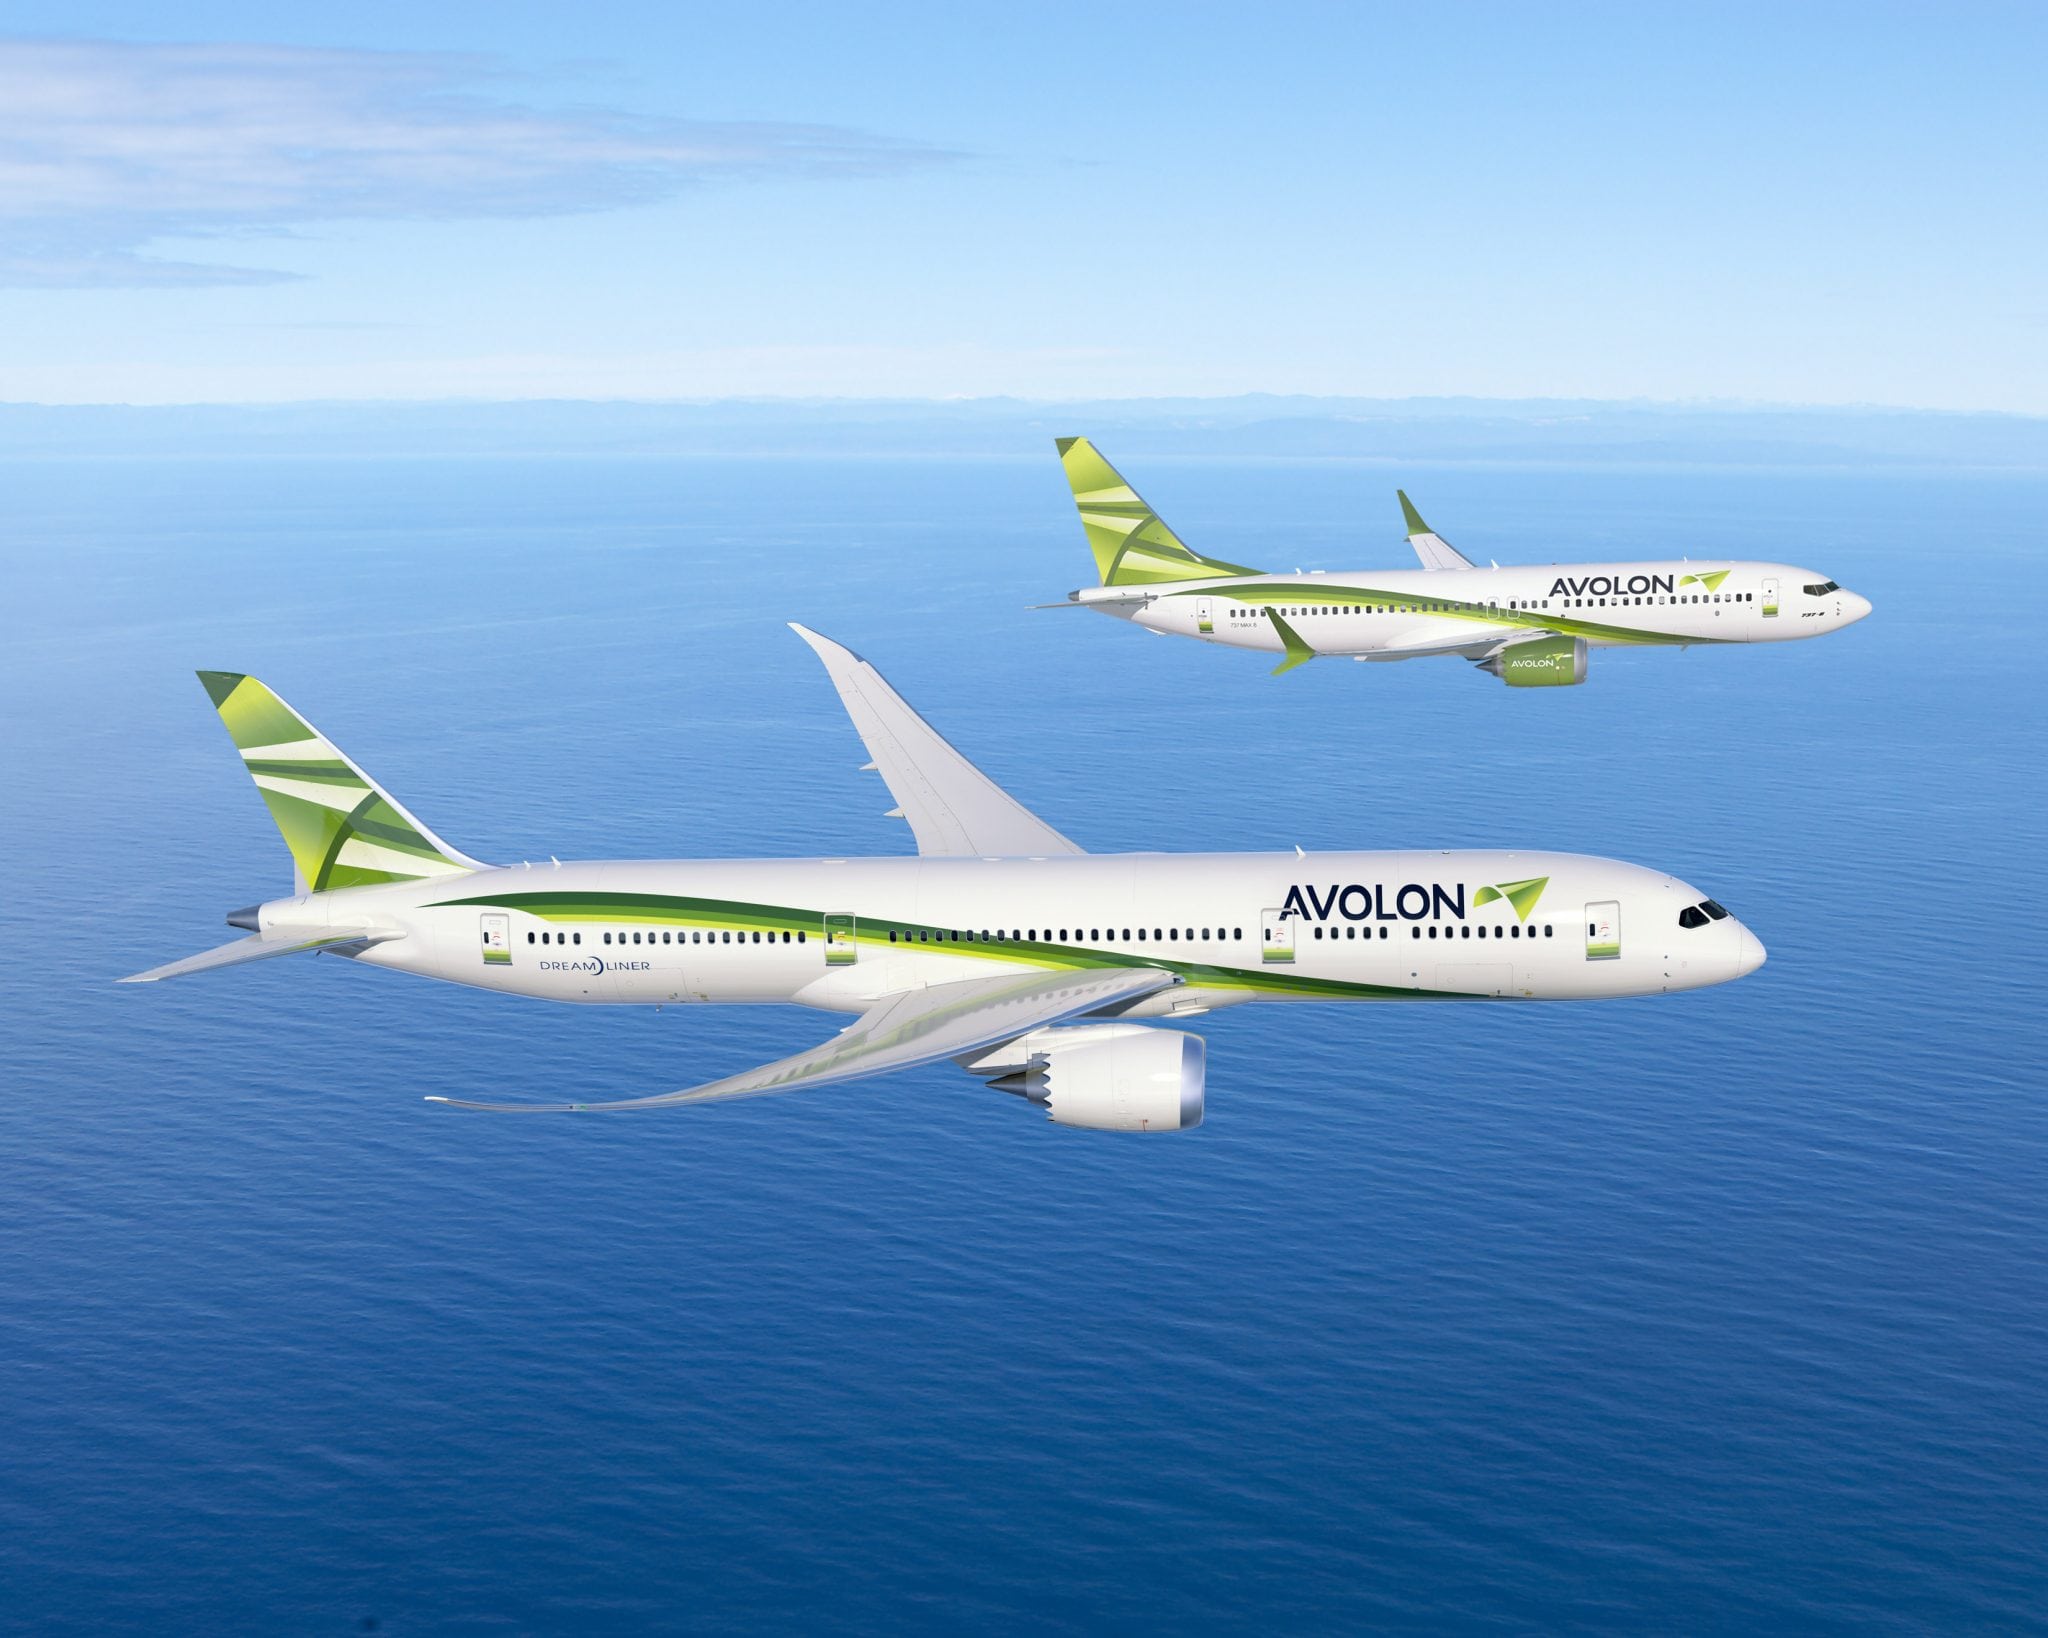 The 787-9 and 737 MAX in Avolon's livery